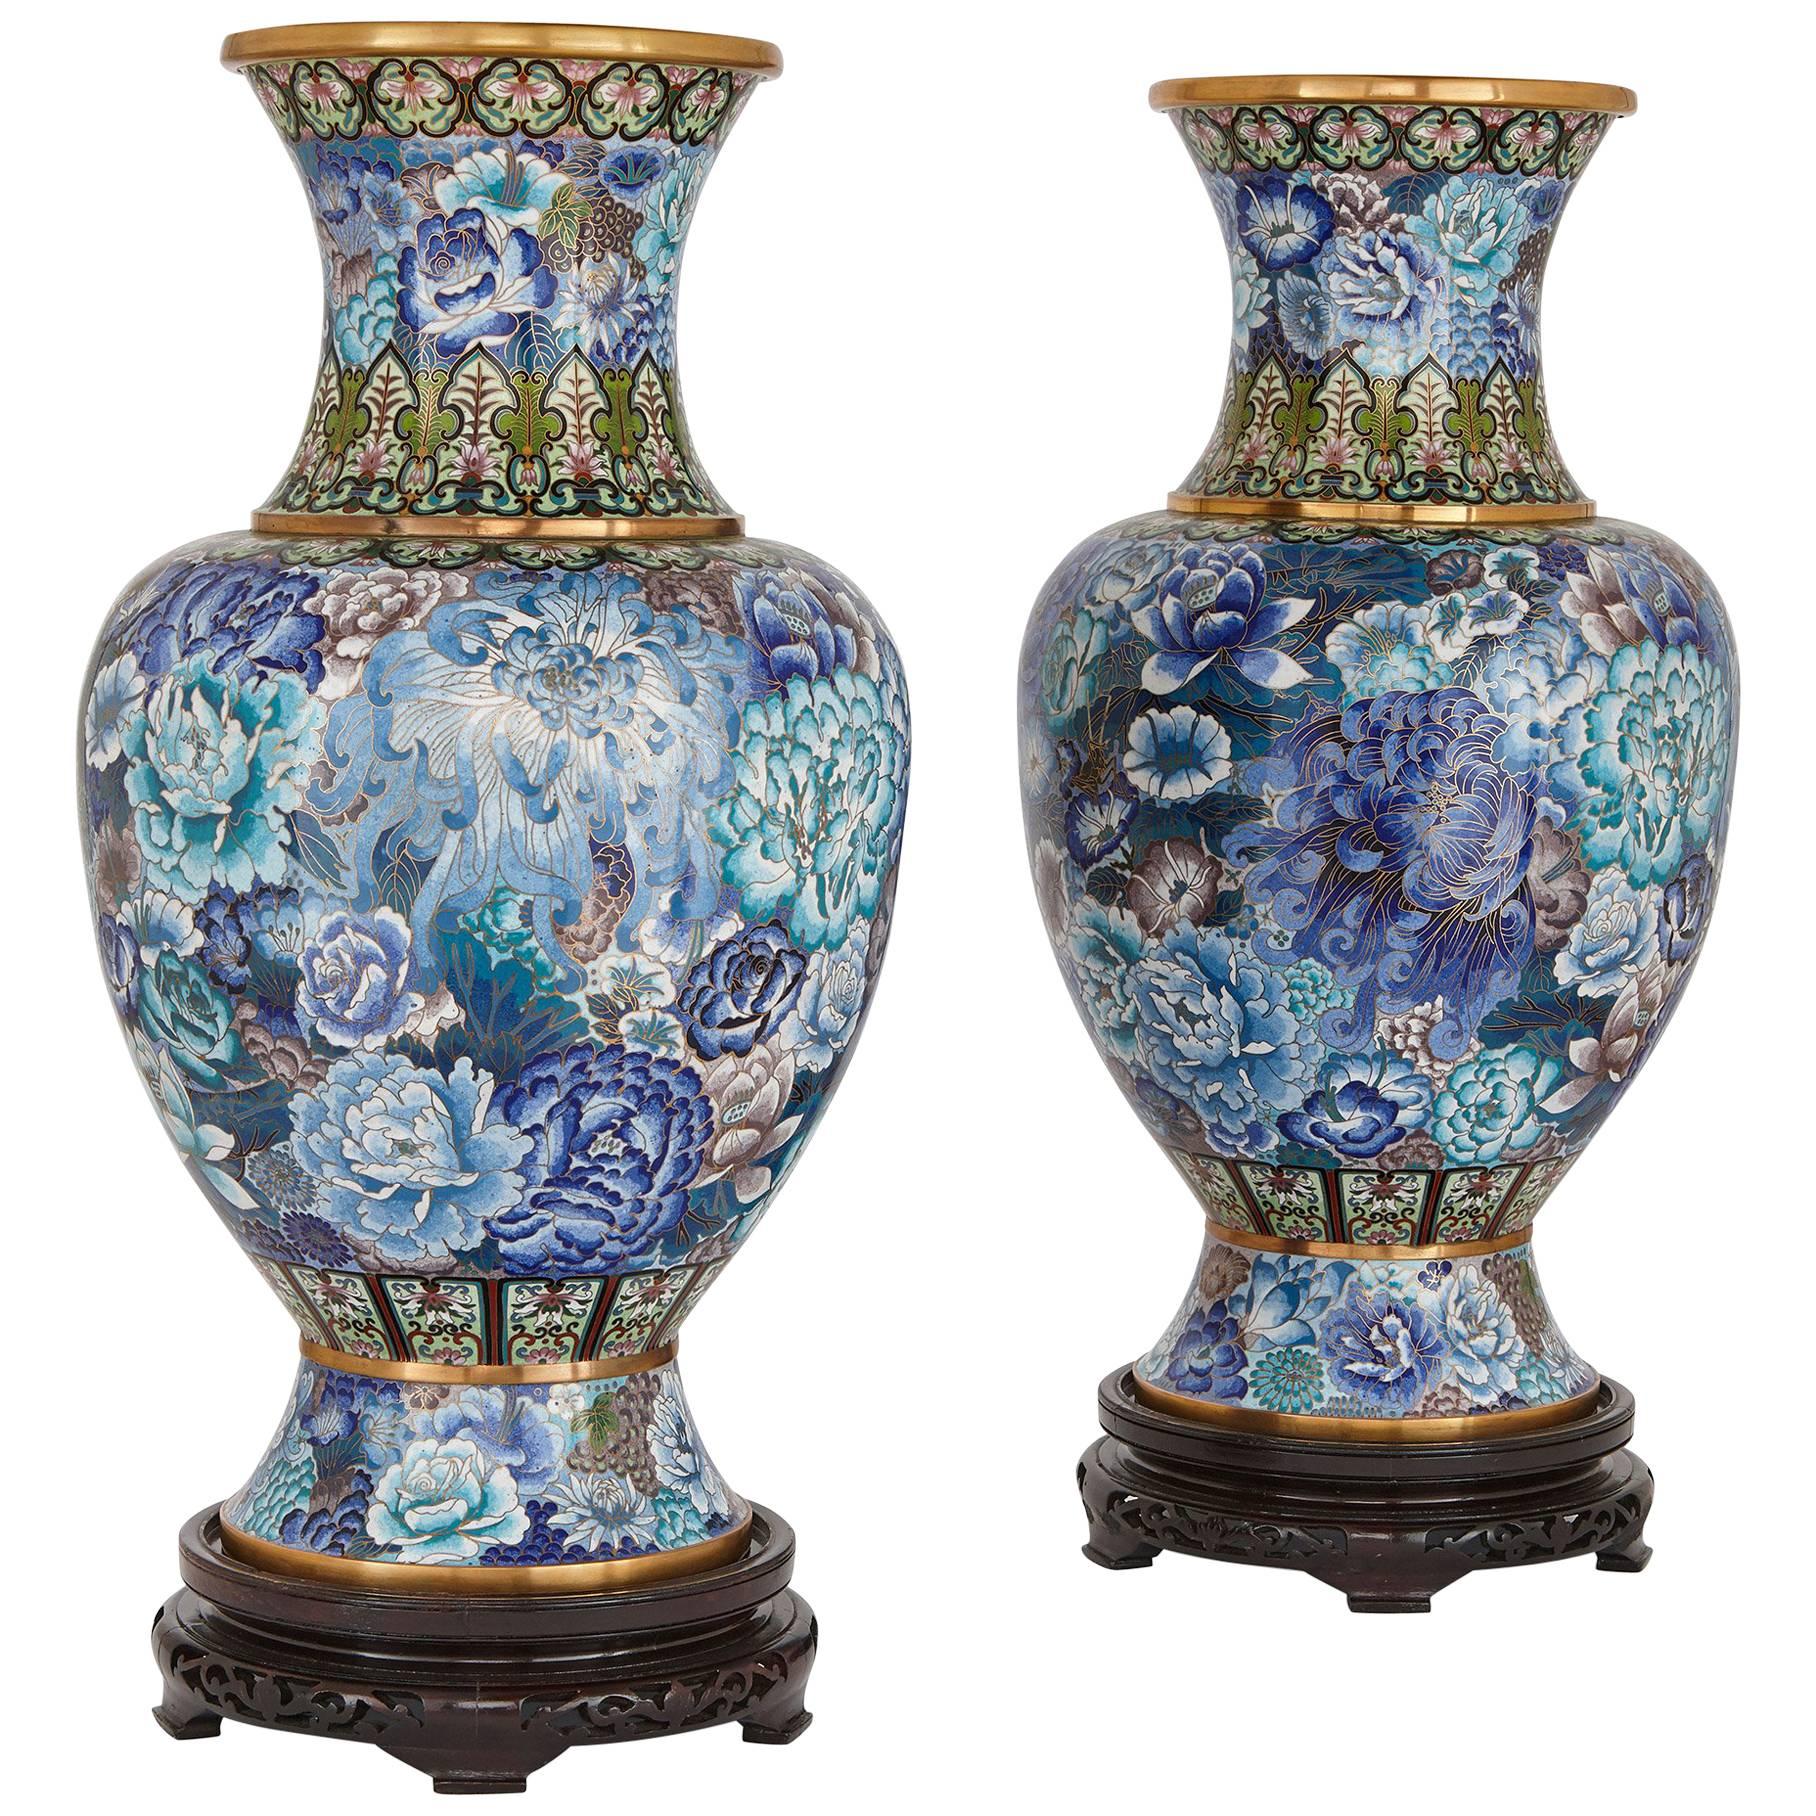 Pair of Cloisonné Enamel Chinese Vases, Qing Period